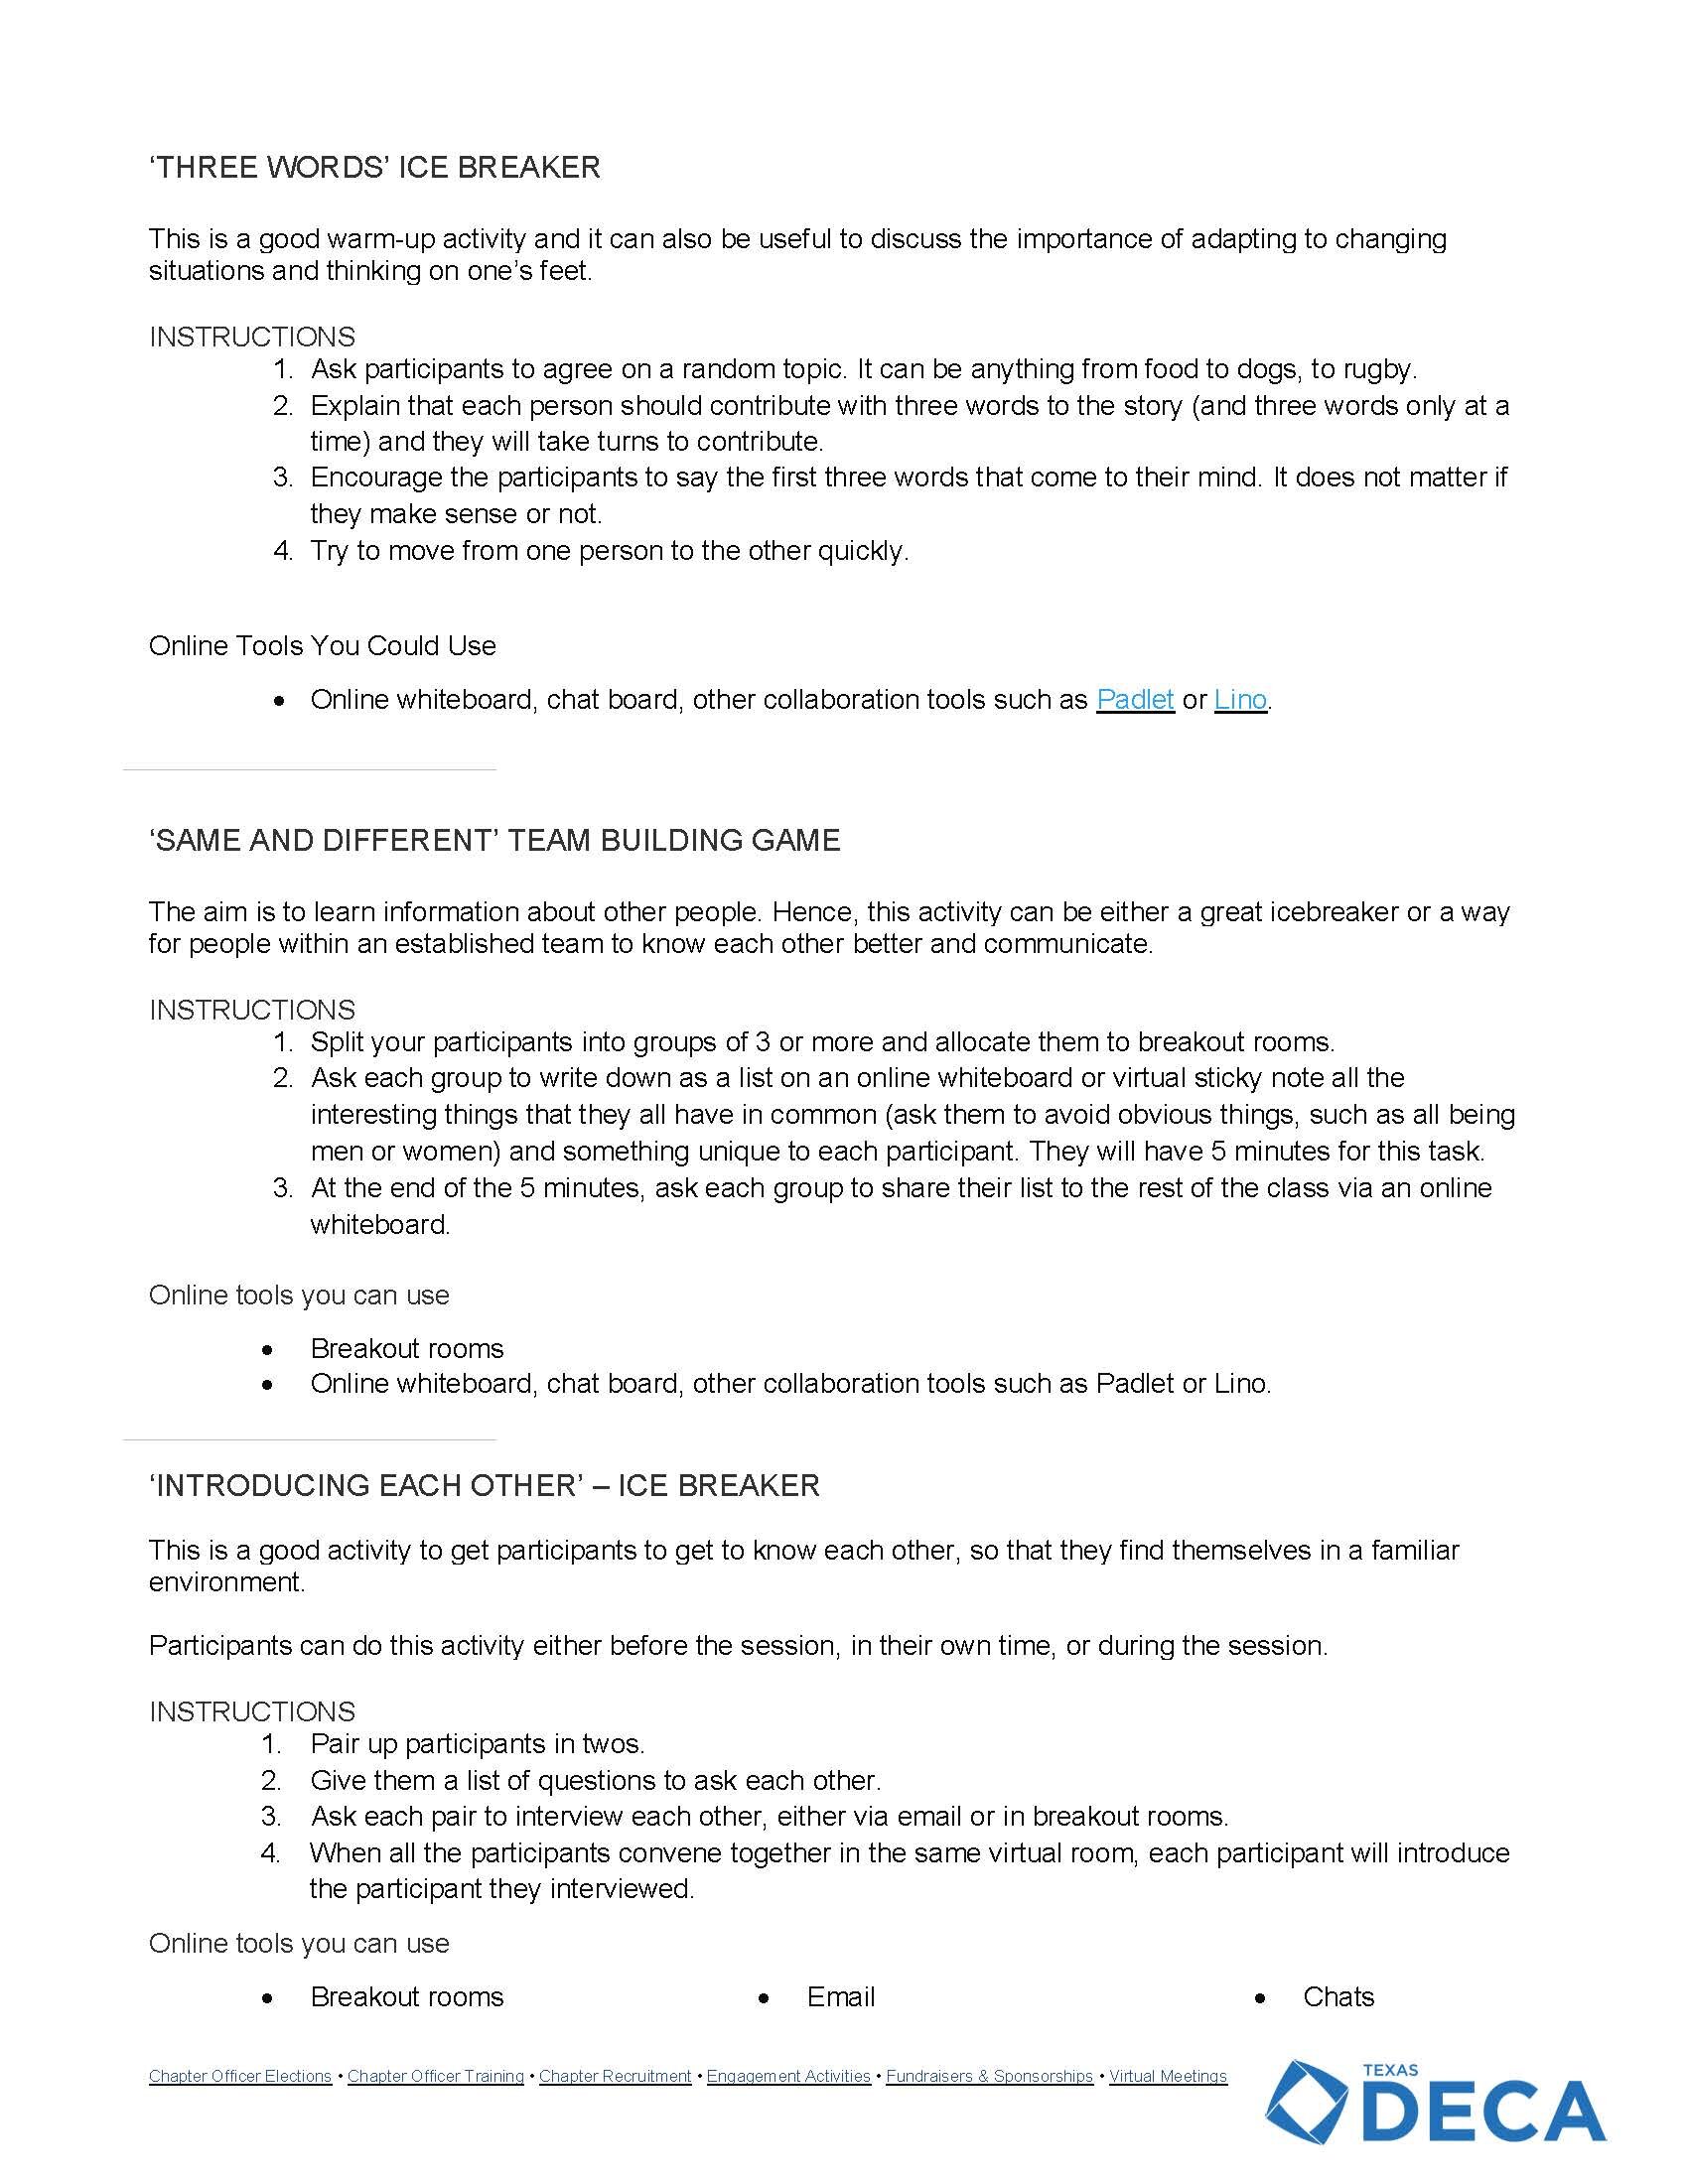 Chapter Toolkit - Texas DECA_Page_11.jpg